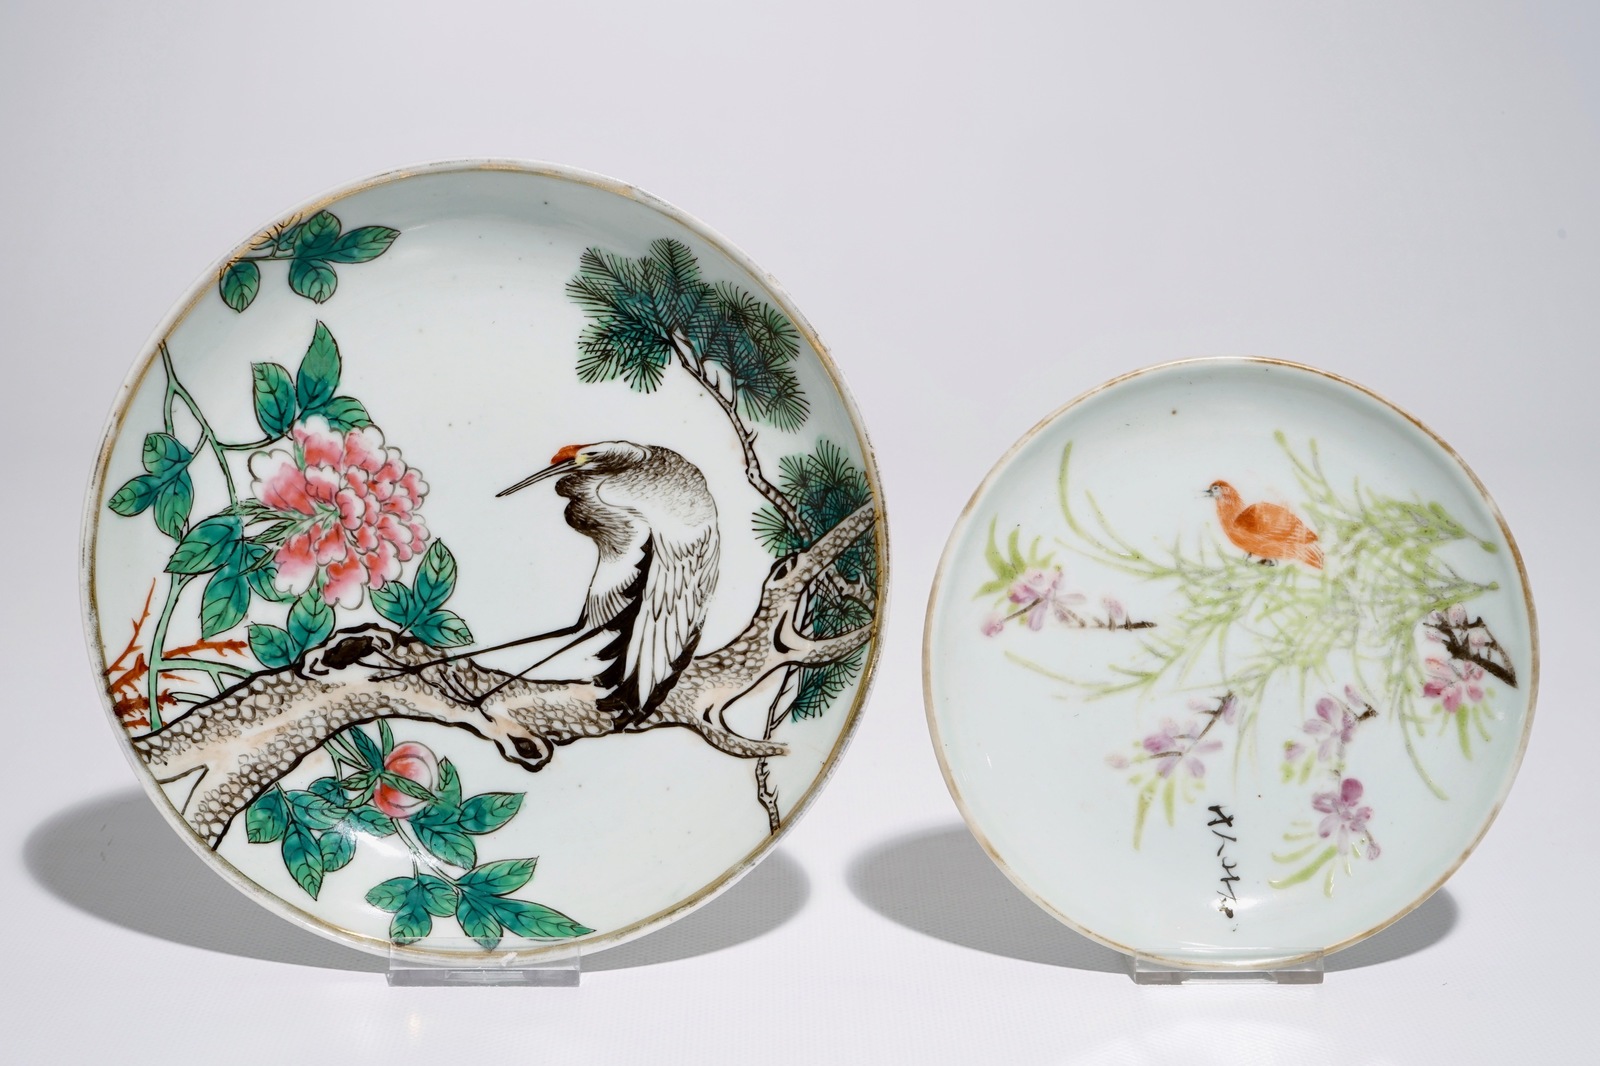 A varied lot of Chinese qianjiang cai porcelain, 19/20th C. Dia.: 17 cm - H.: 12 cm (largest bowl) - Image 2 of 9